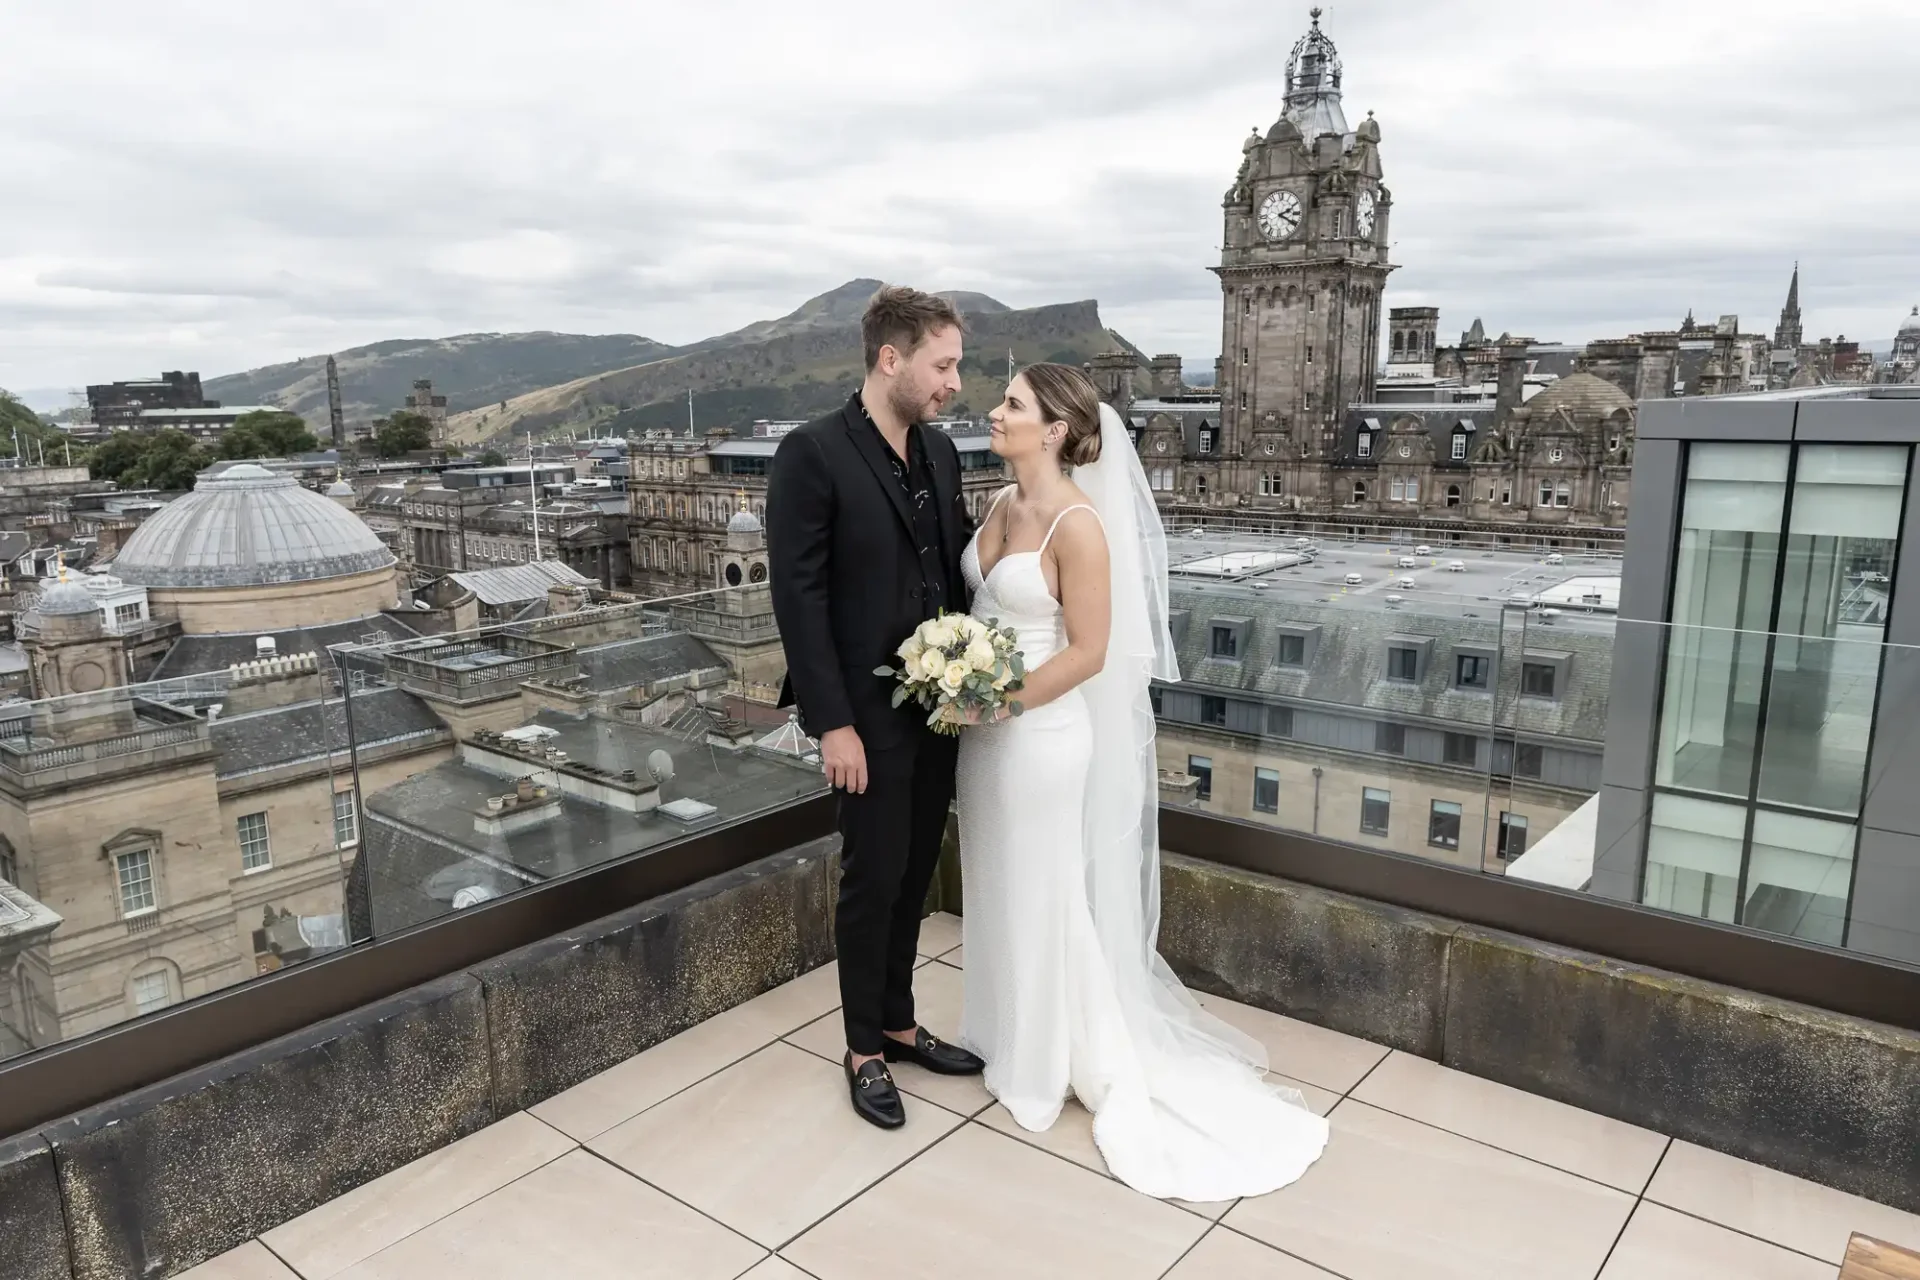 A bride and groom standing on a rooftop, affectionately looking at each other, with an urban skyline in the background.